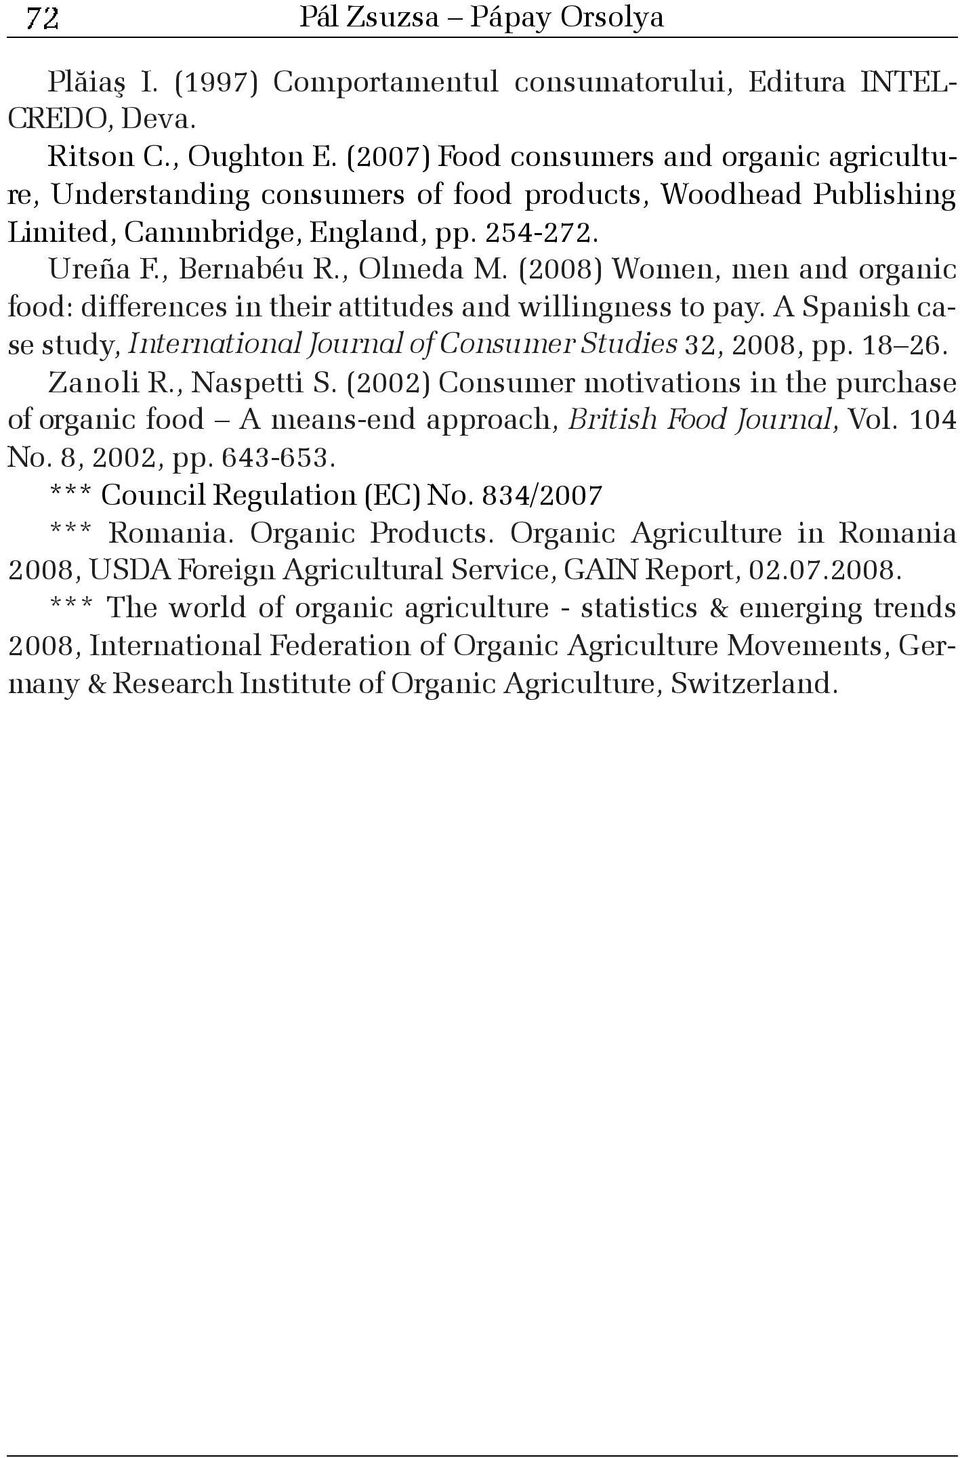 (2008) Women, men and organic food: differences in their attitudes and willingness to pay. A Spanish case study, International Journal of Consumer Studies 32, 2008, pp. 18 26. Zanoli R., Naspetti S.